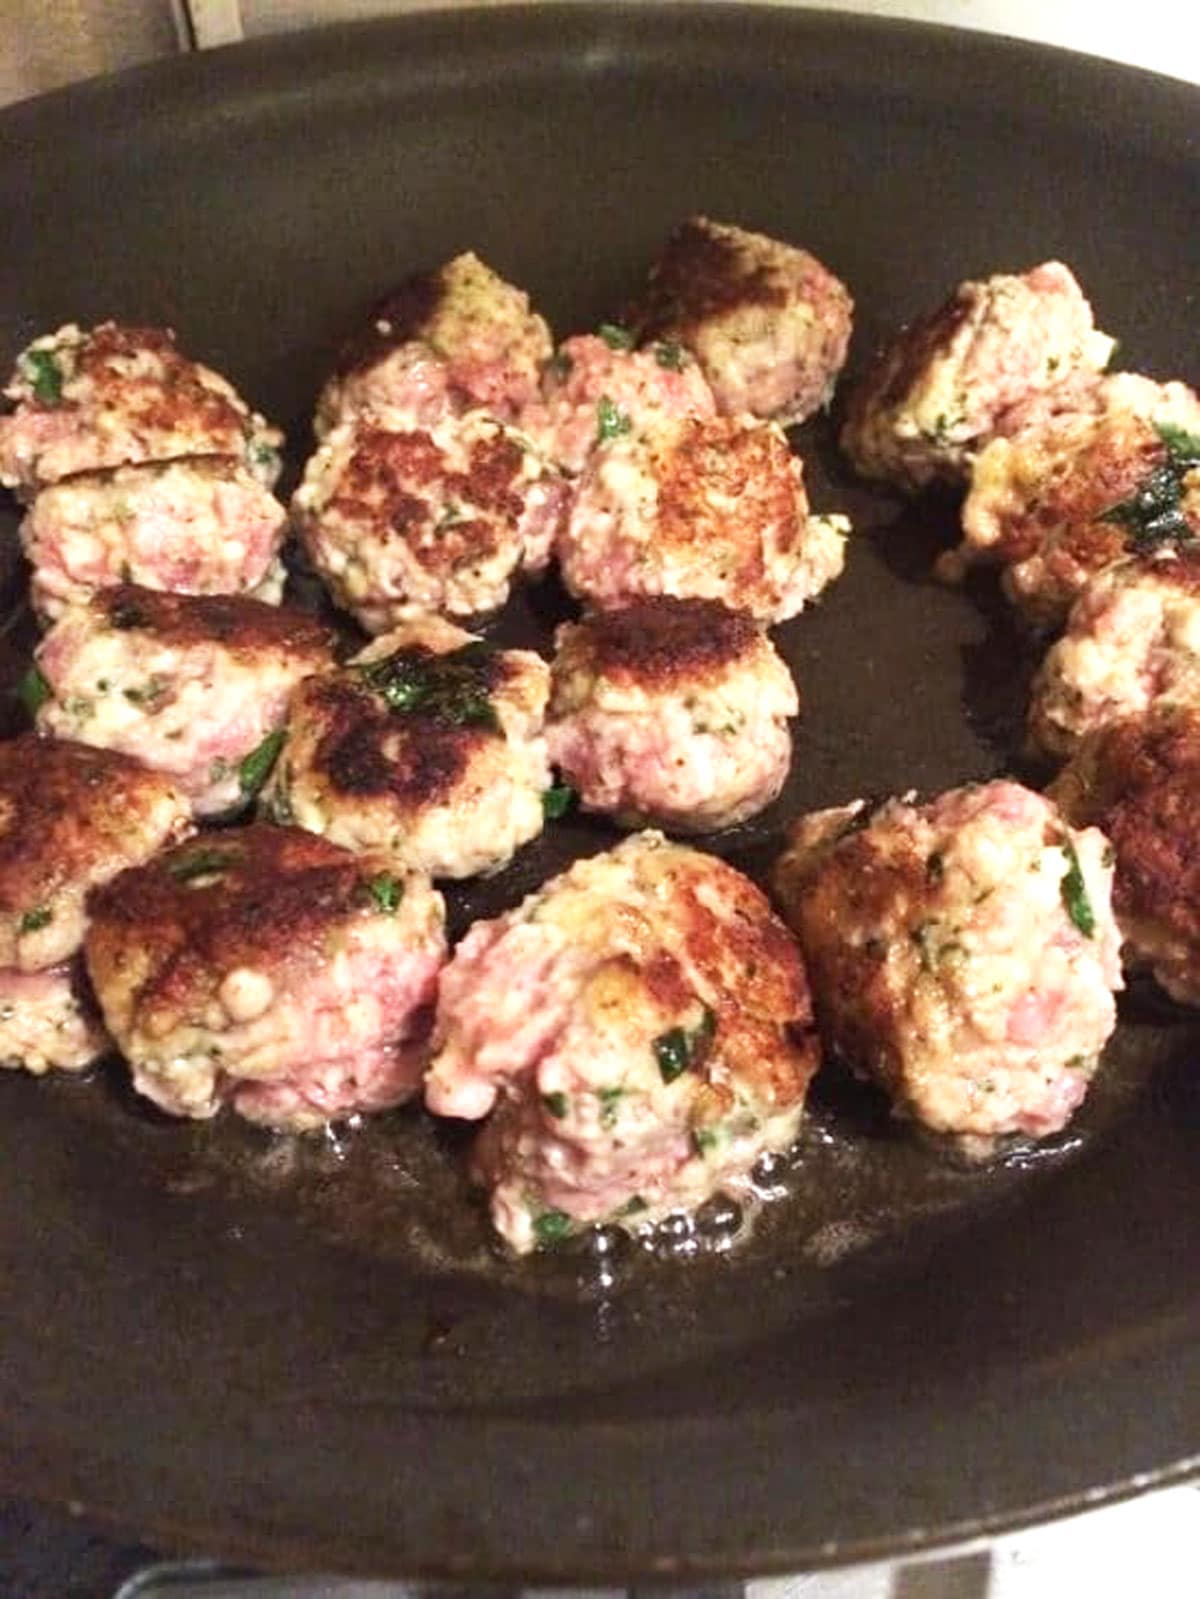 Meatballs cooking in a cast iron skillet.